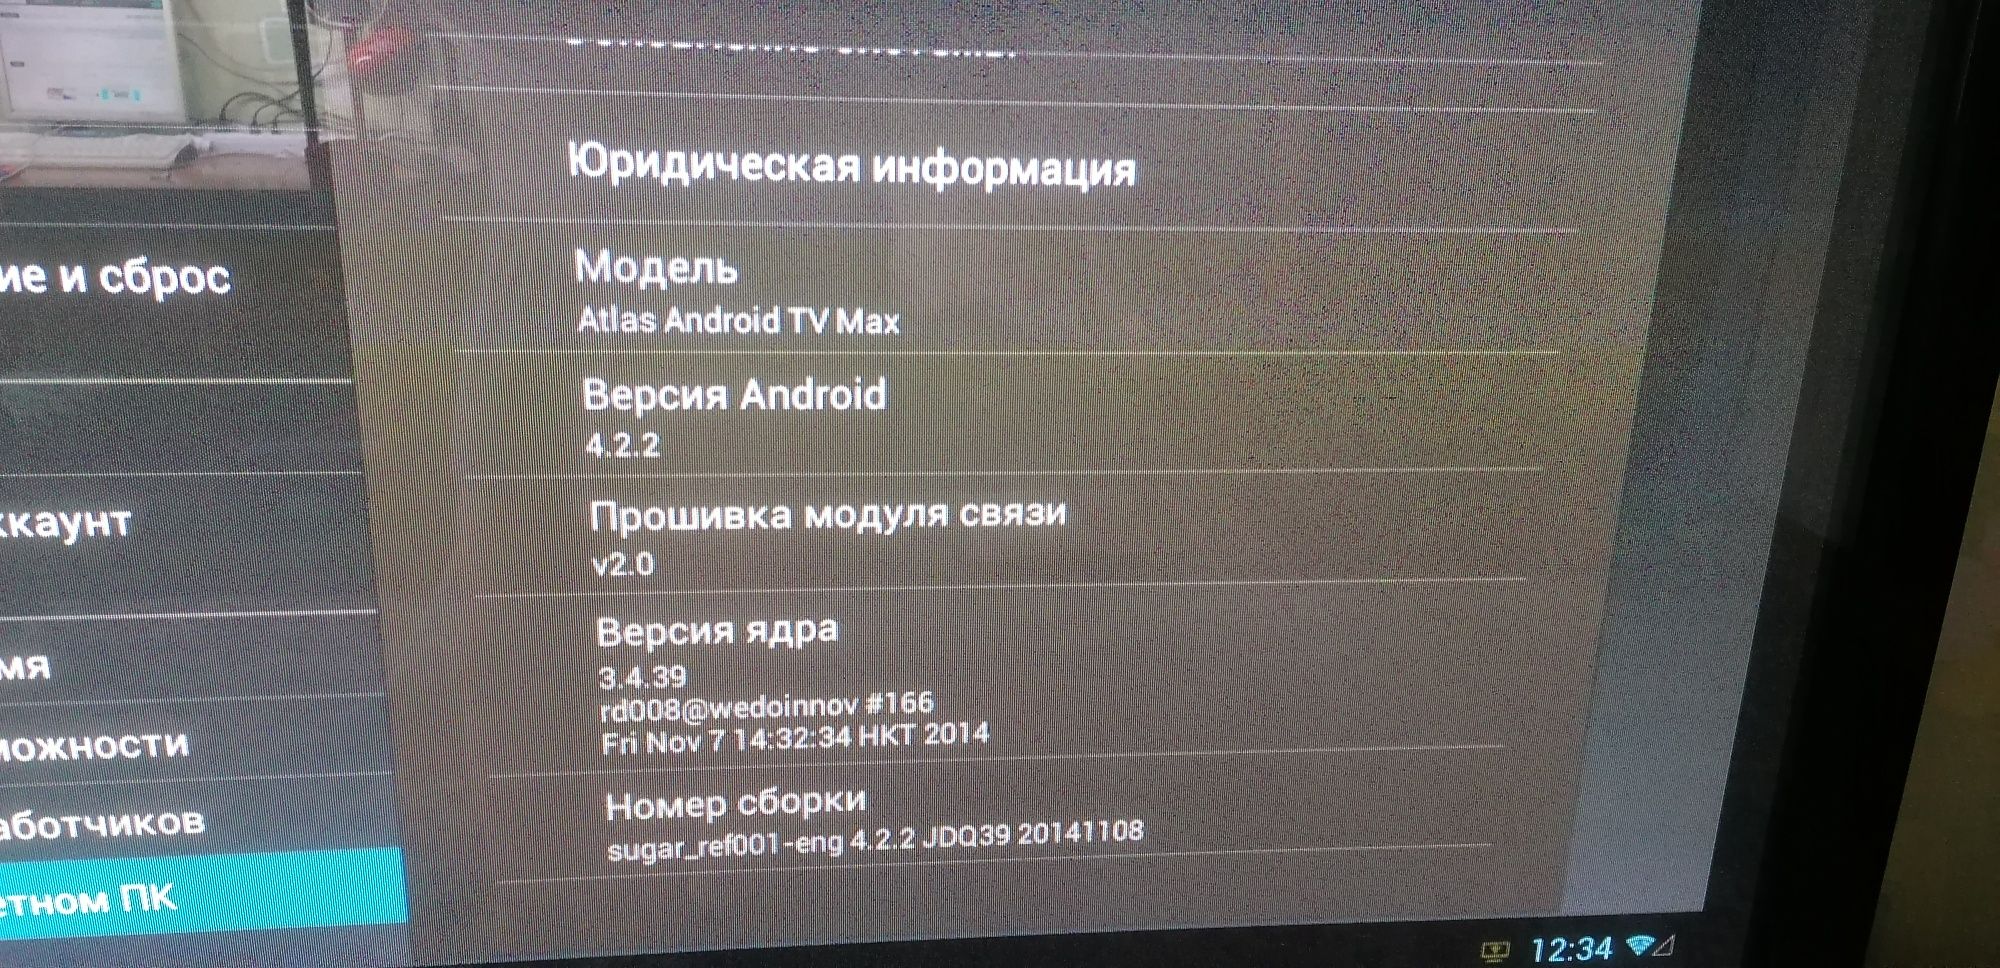 Atlas Android tv max